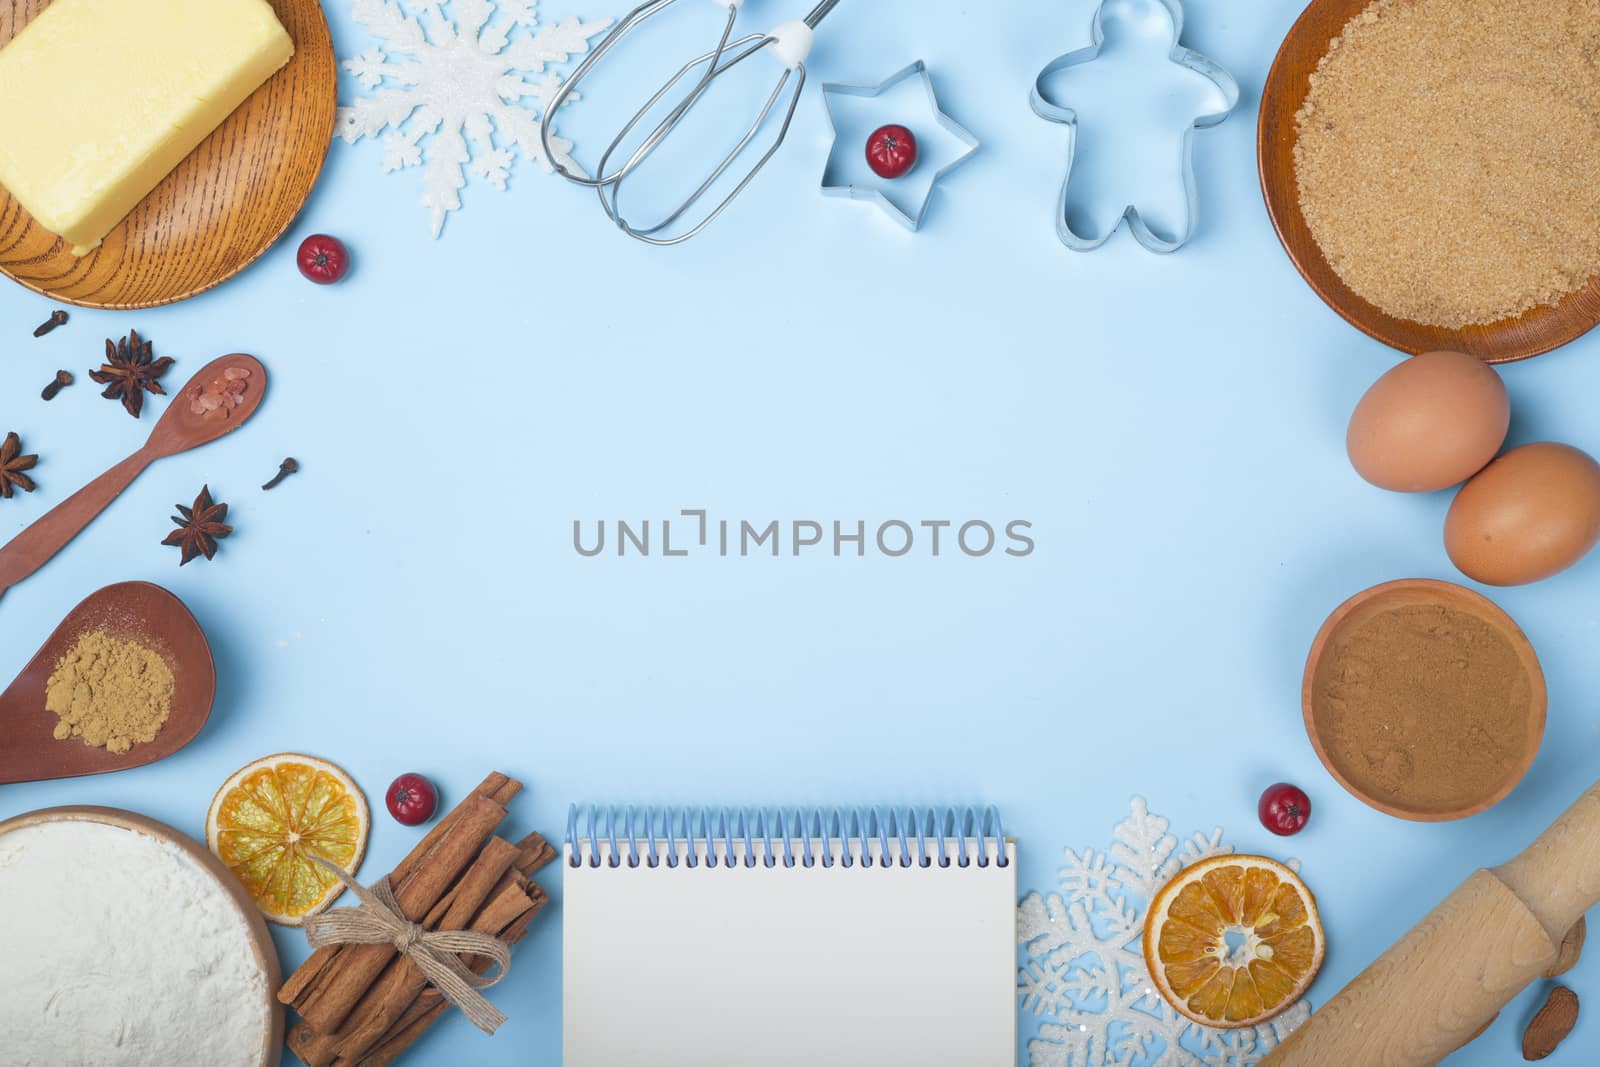 Christmas gingerbread cookies cooking background flat lay top view template with copy space for text. Baking utensils, spices and food ingredients on blue background